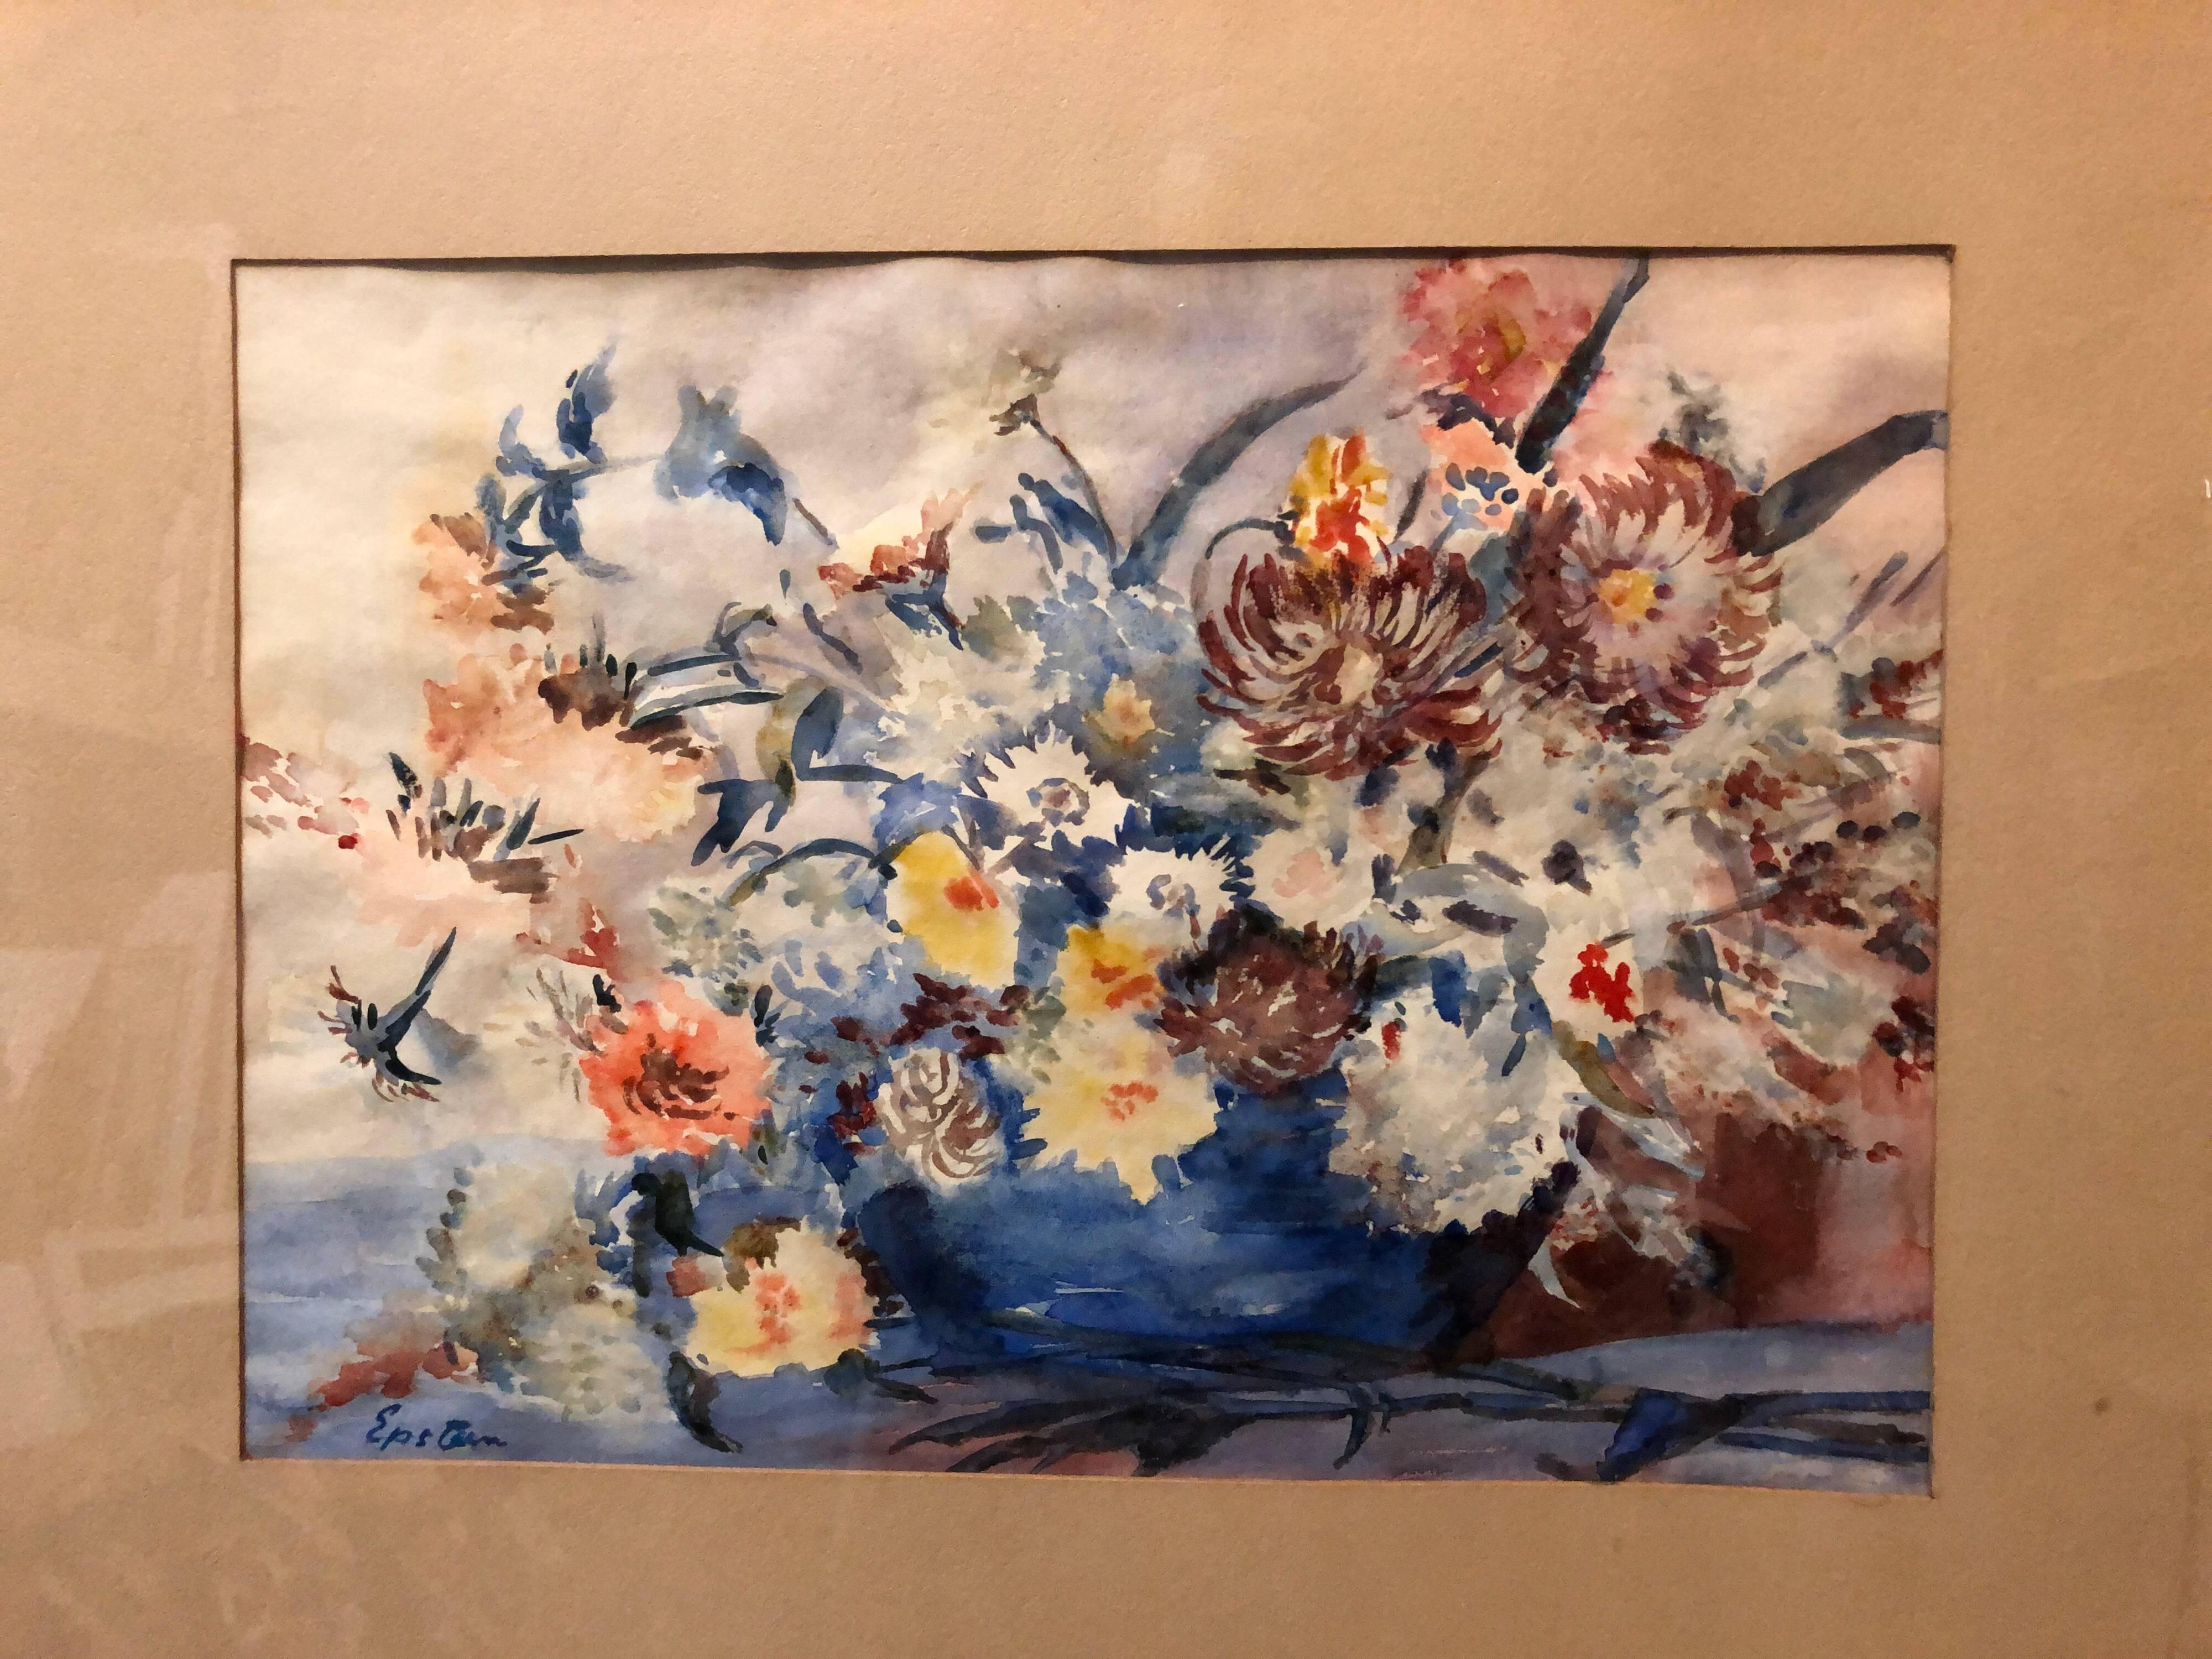 British Modernist Vibrant Watercolor Painting of Flowers - Brown Still-Life by Sir Jacob Epstein